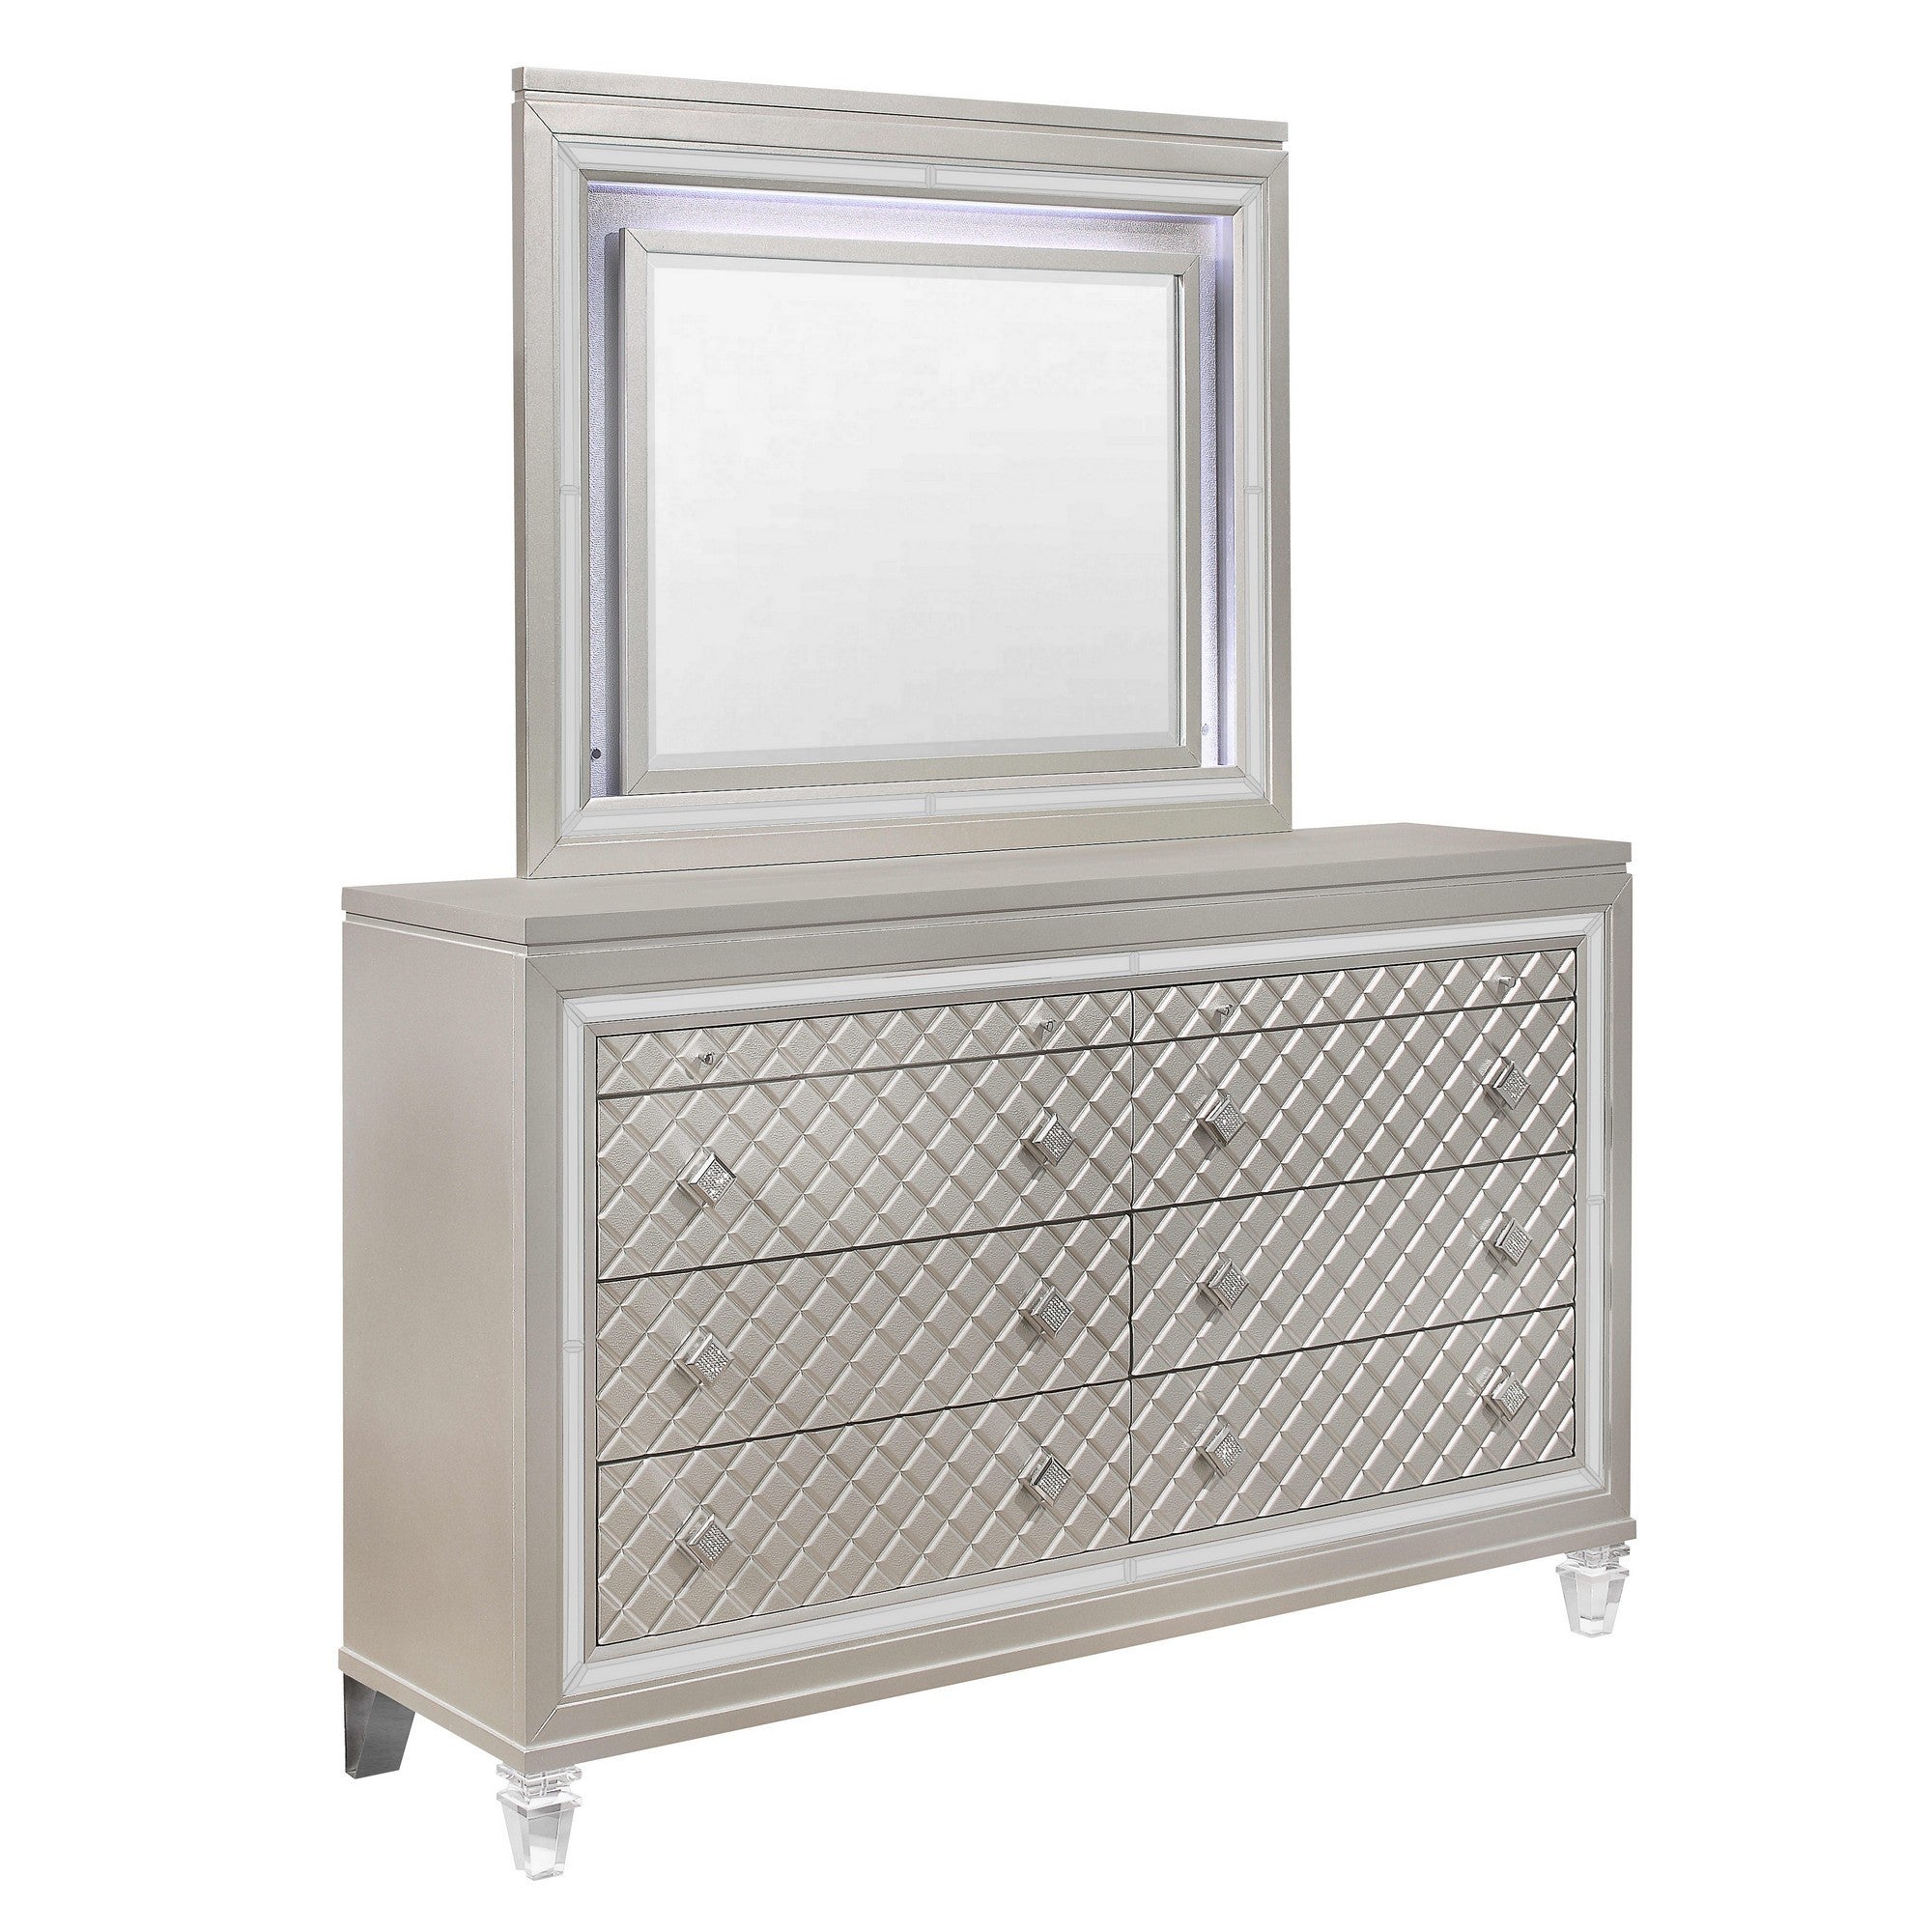 Champagne Toned Dresser with Tapered Acrylic Legs and 2 Jewelry Drawers